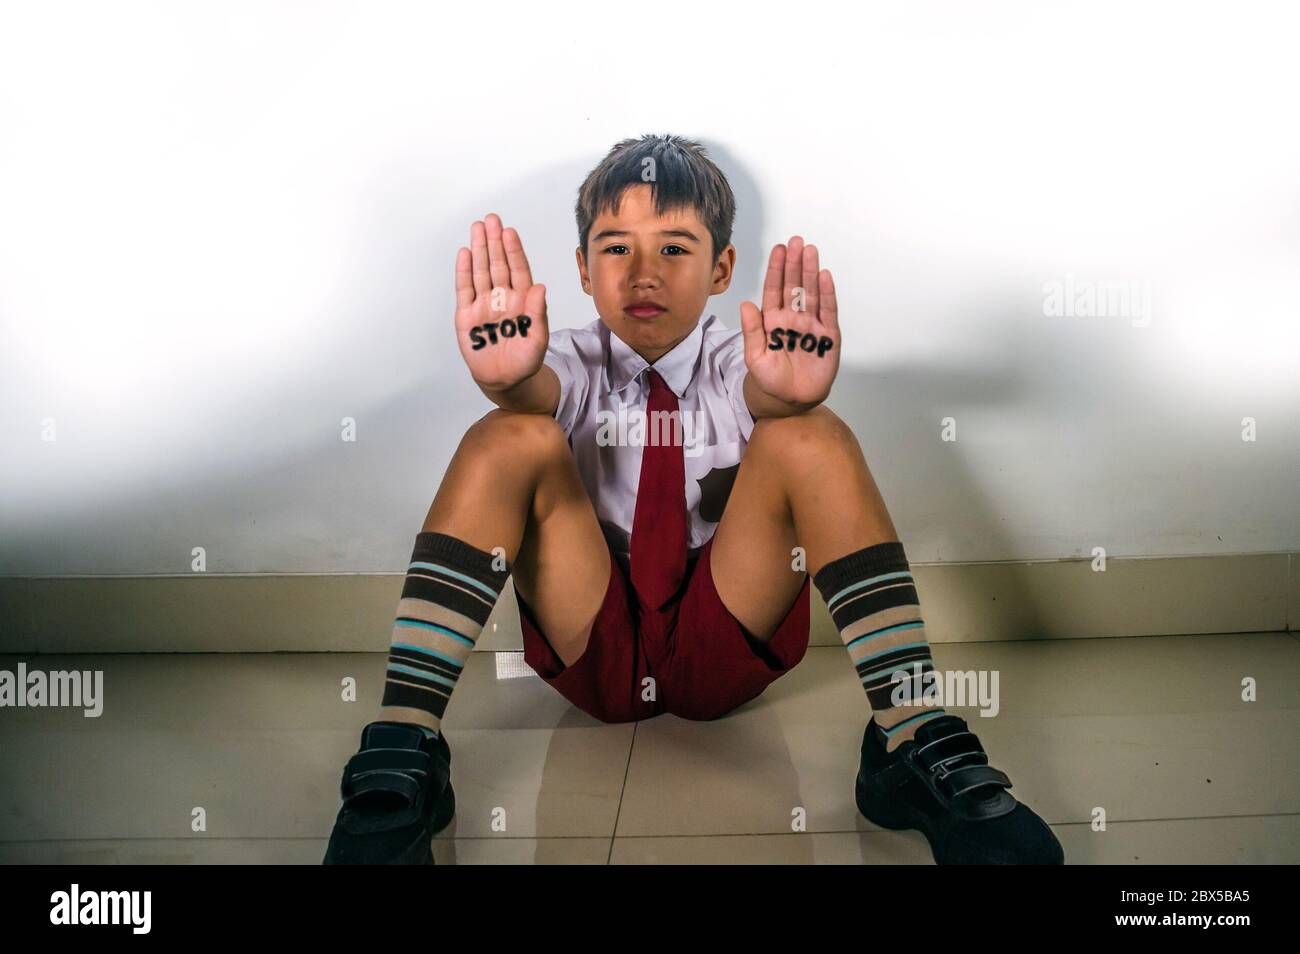 lifestyle dramatic isolated portrait of young kid sad and depressed suffering bullying problem and abuse at school with stop word written on his hands Stock Photo